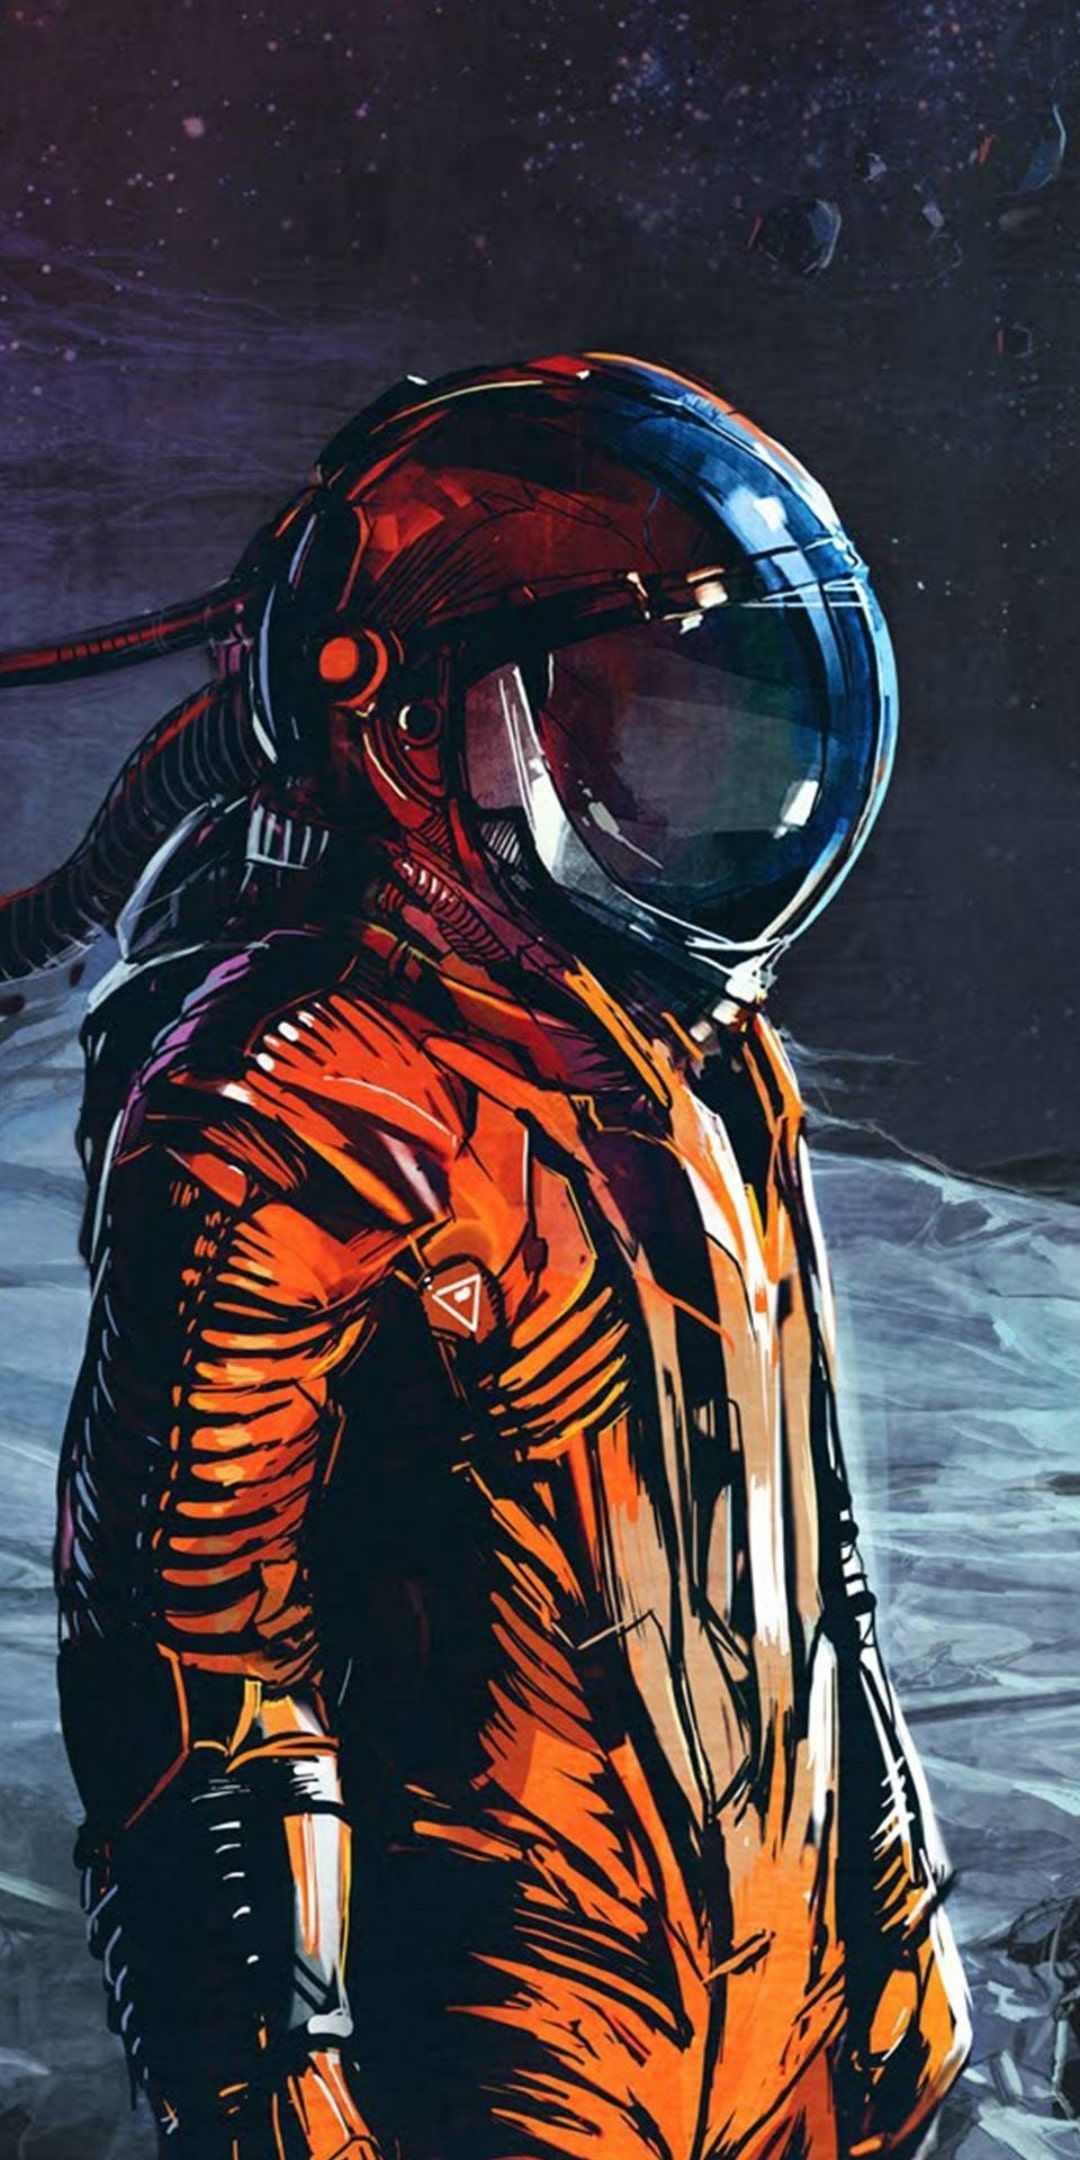 Astronaut wallpaper for iPhone with high-resolution 1080x1920 pixel. You can use this wallpaper for your iPhone 5, 6, 7, 8, X, XS, XR backgrounds, Mobile Screensaver, or iPad Lock Screen - Astronaut, space